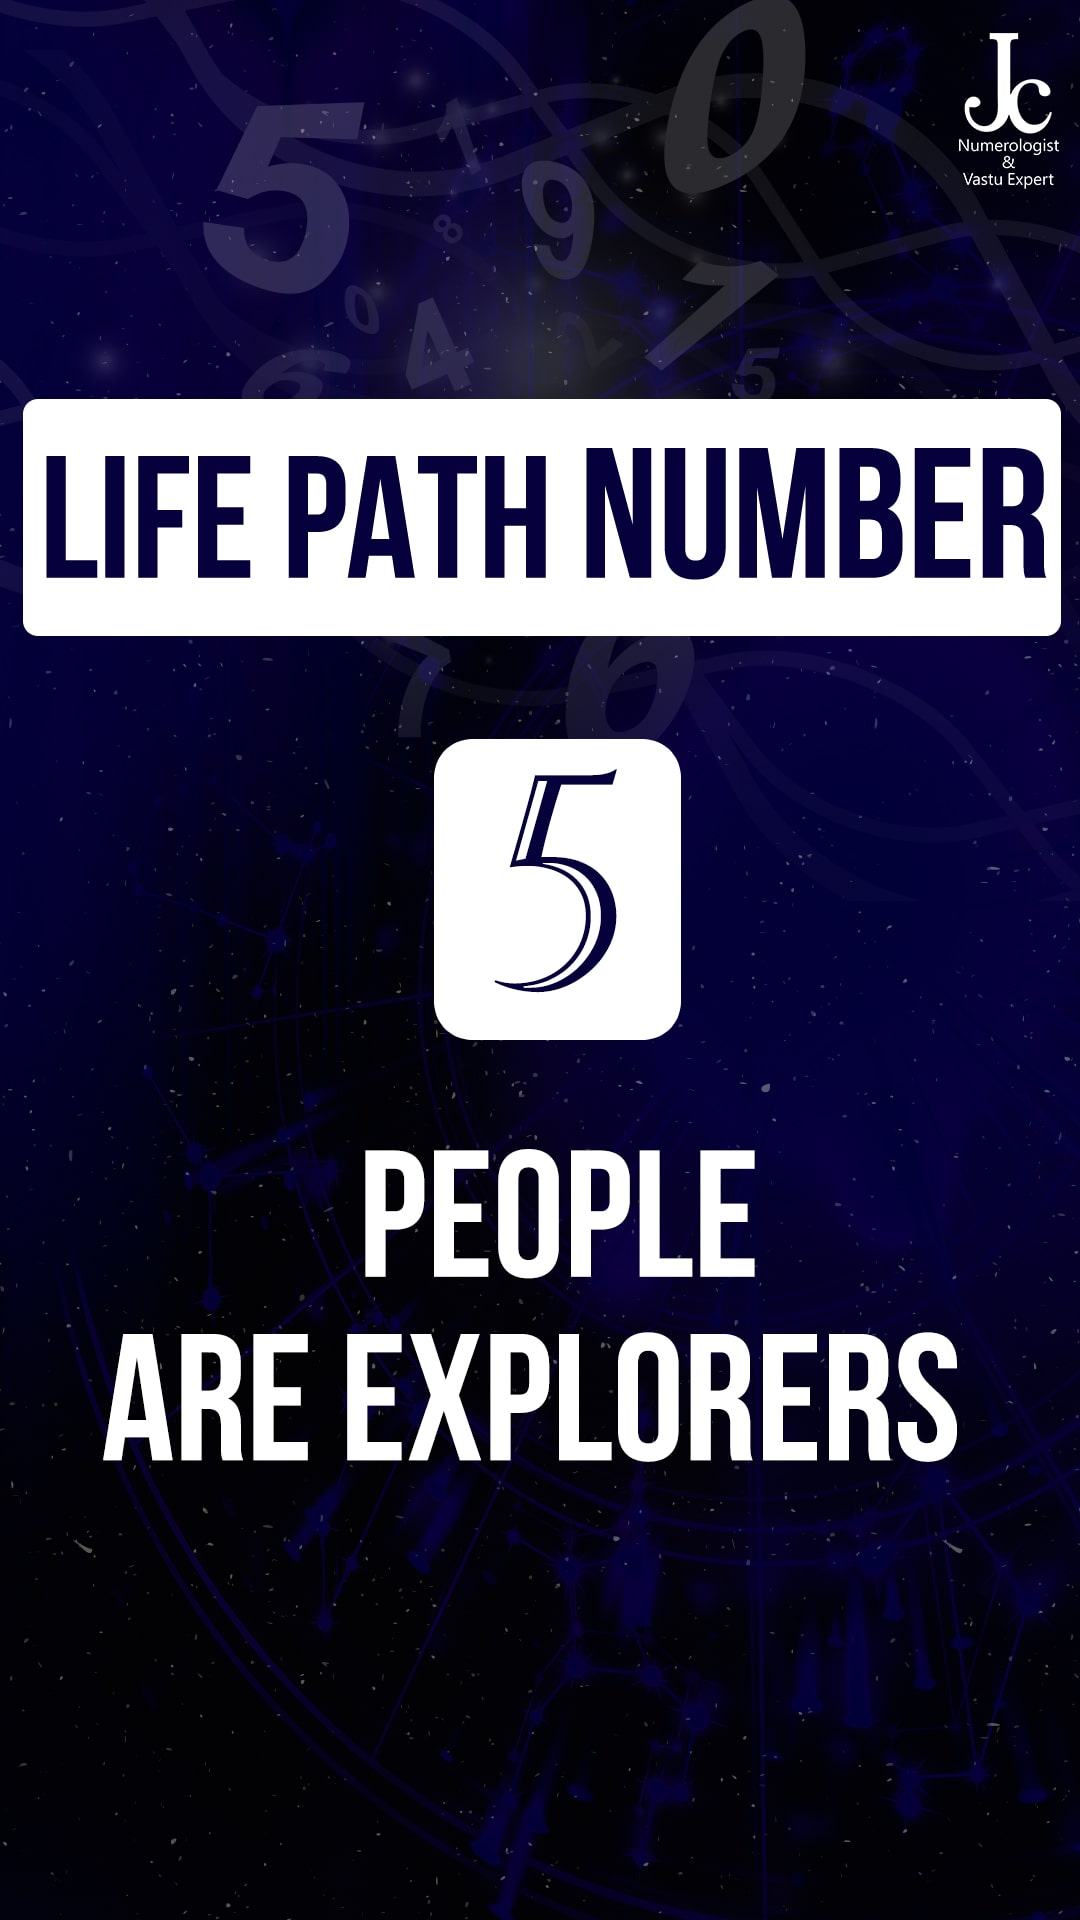 Life Path Number Meaning for 1 to 9 How to Calculate Life Path Number